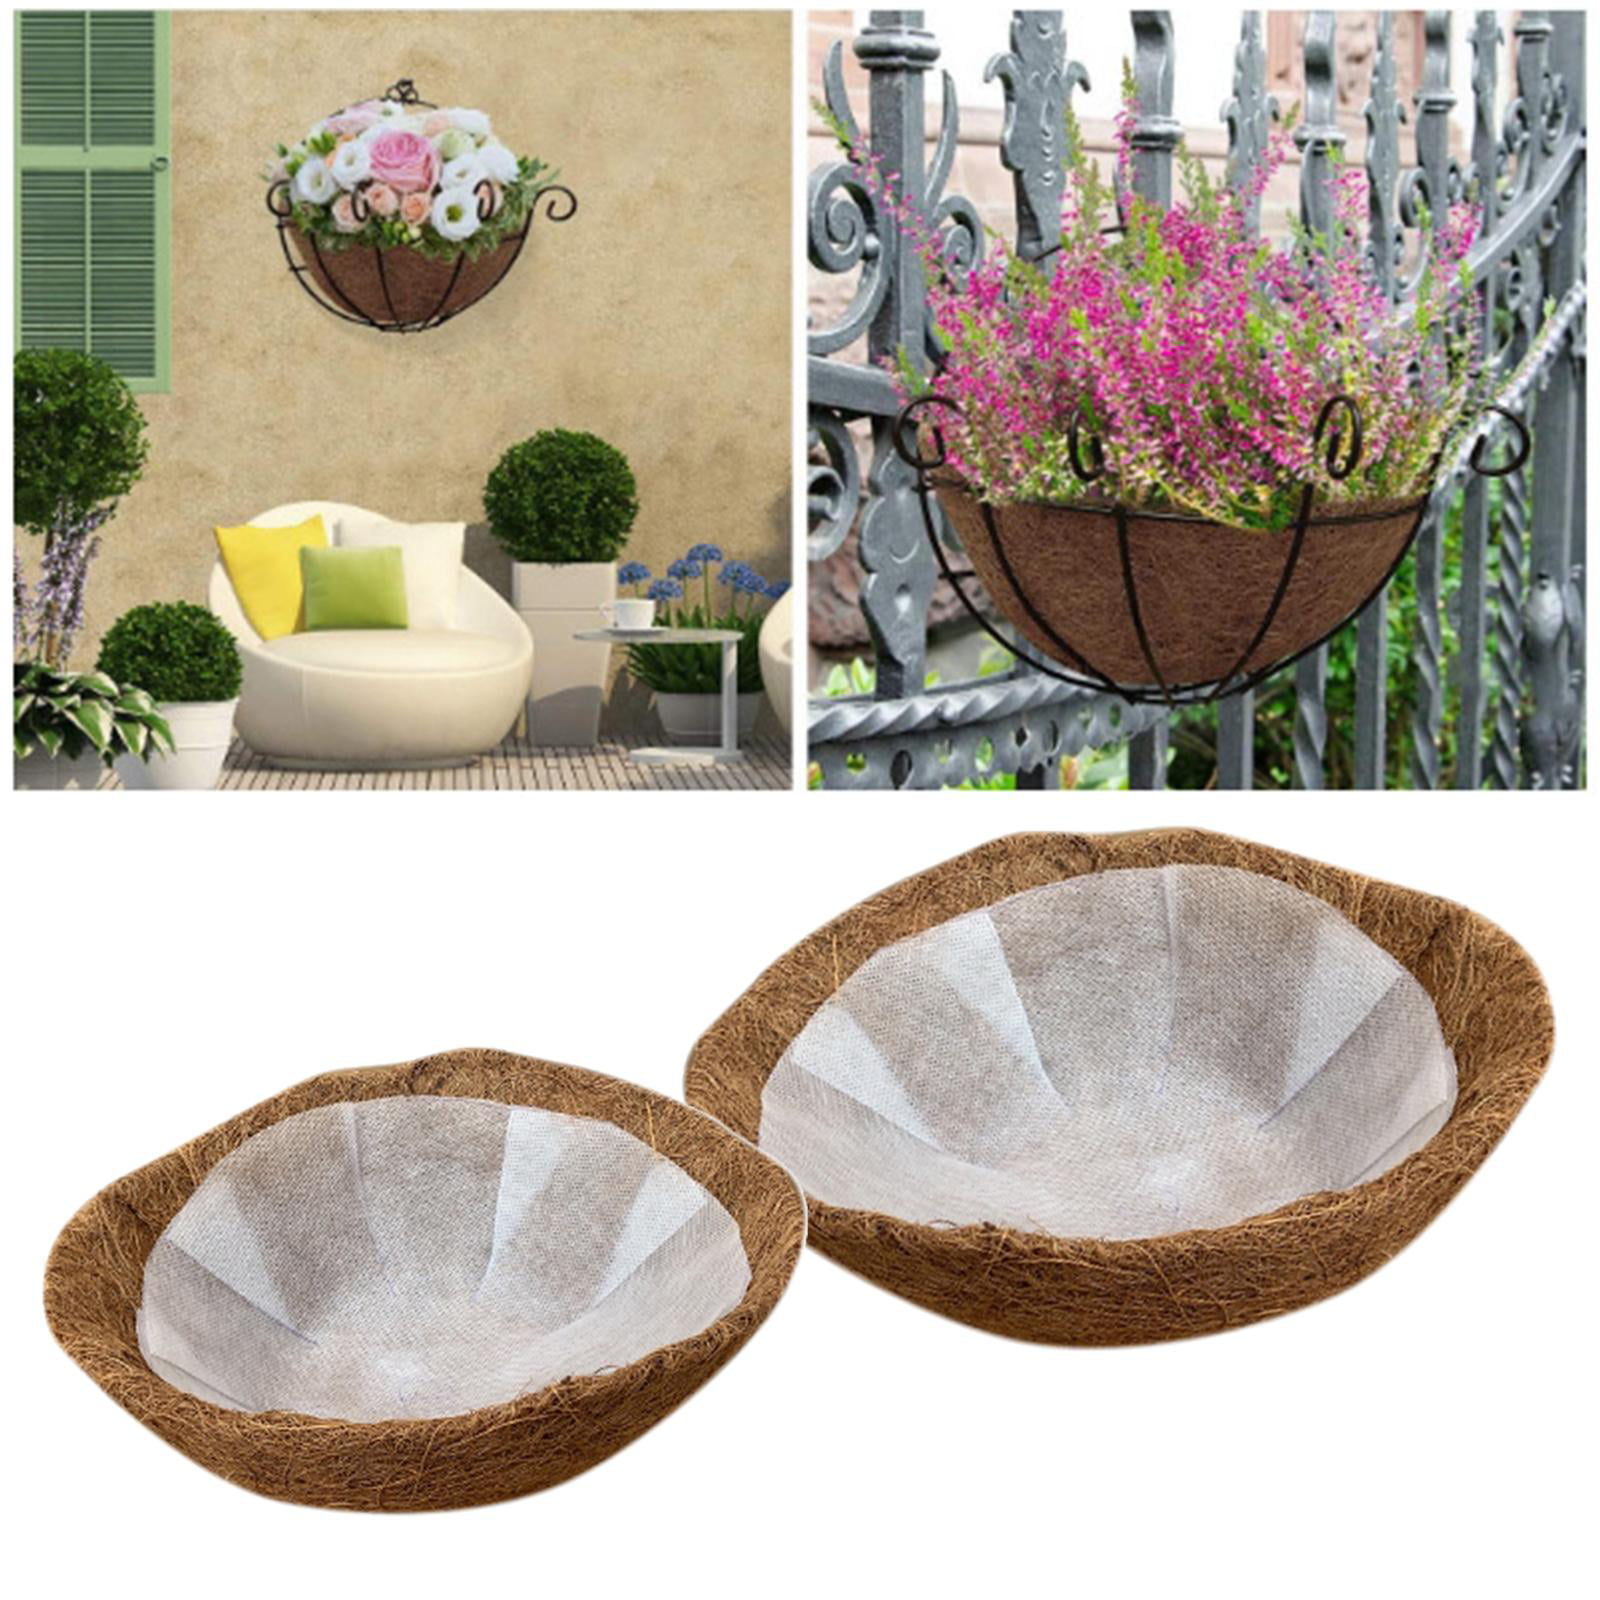 20 x 30cm Hanging Baskets Garden Planters Pots with Cocos Liner & Hang Chain 